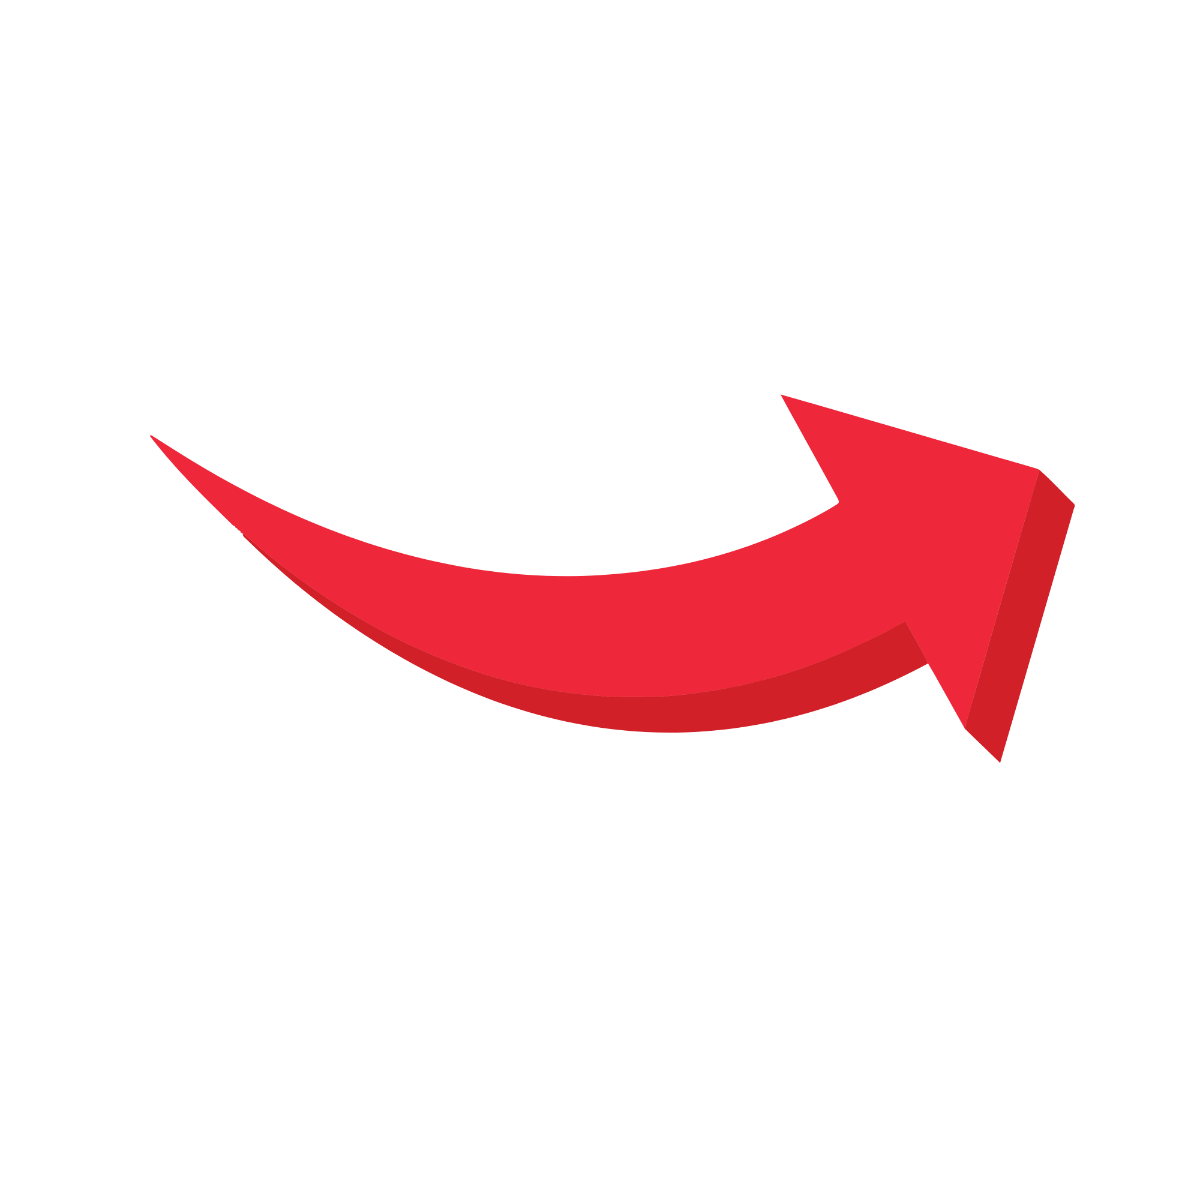 Curved Red Arrow Vector Template